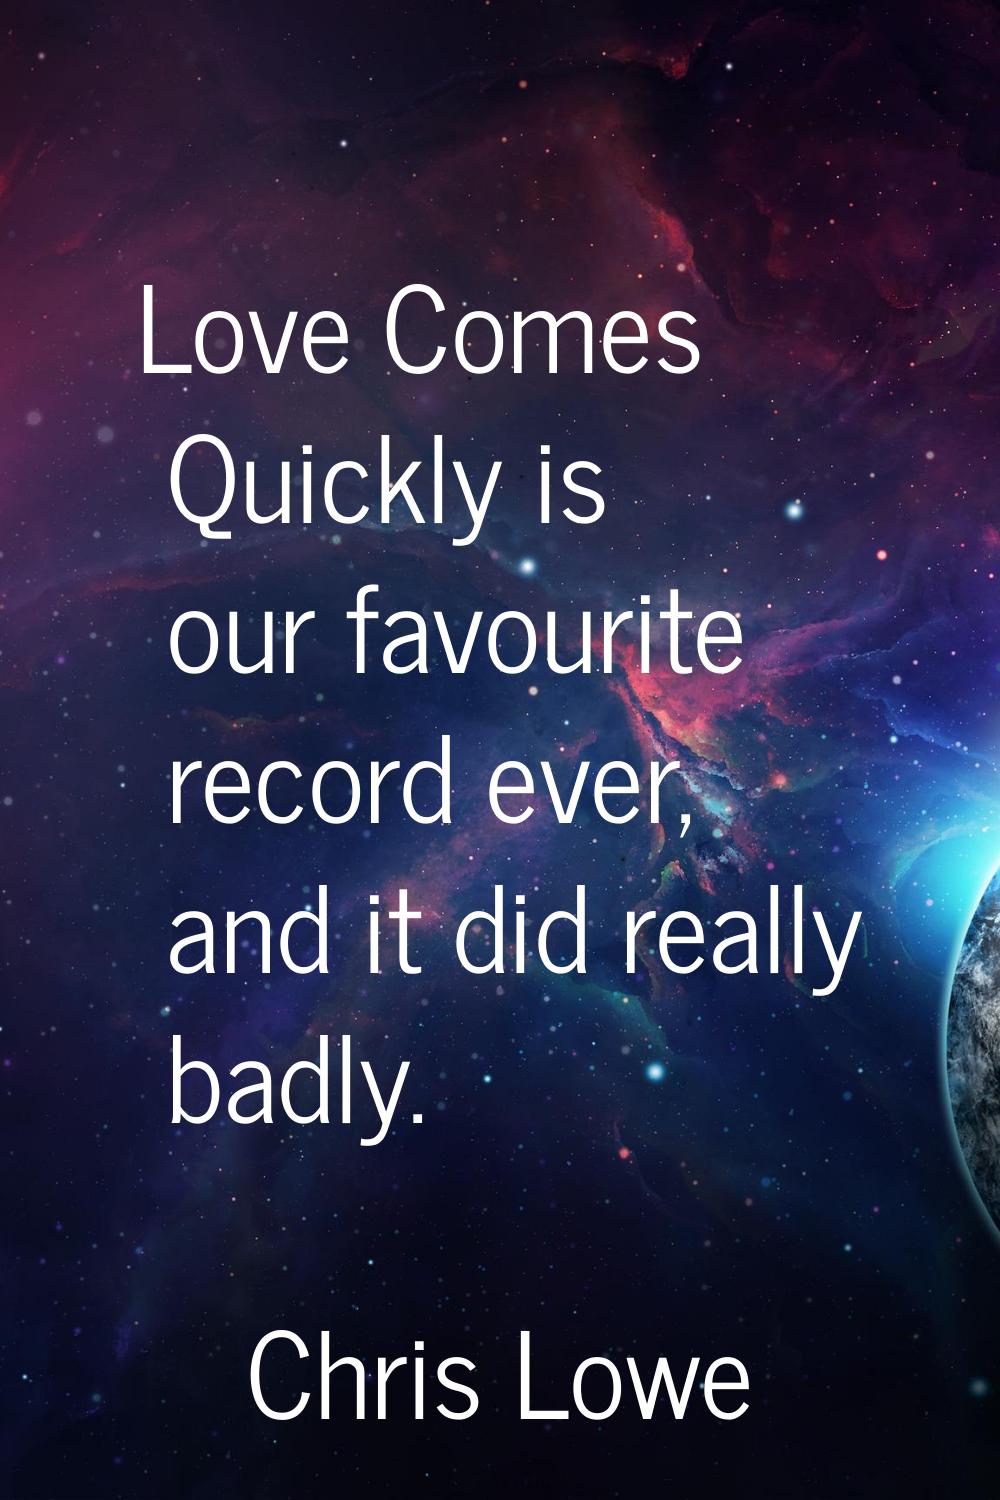 Love Comes Quickly is our favourite record ever, and it did really badly.